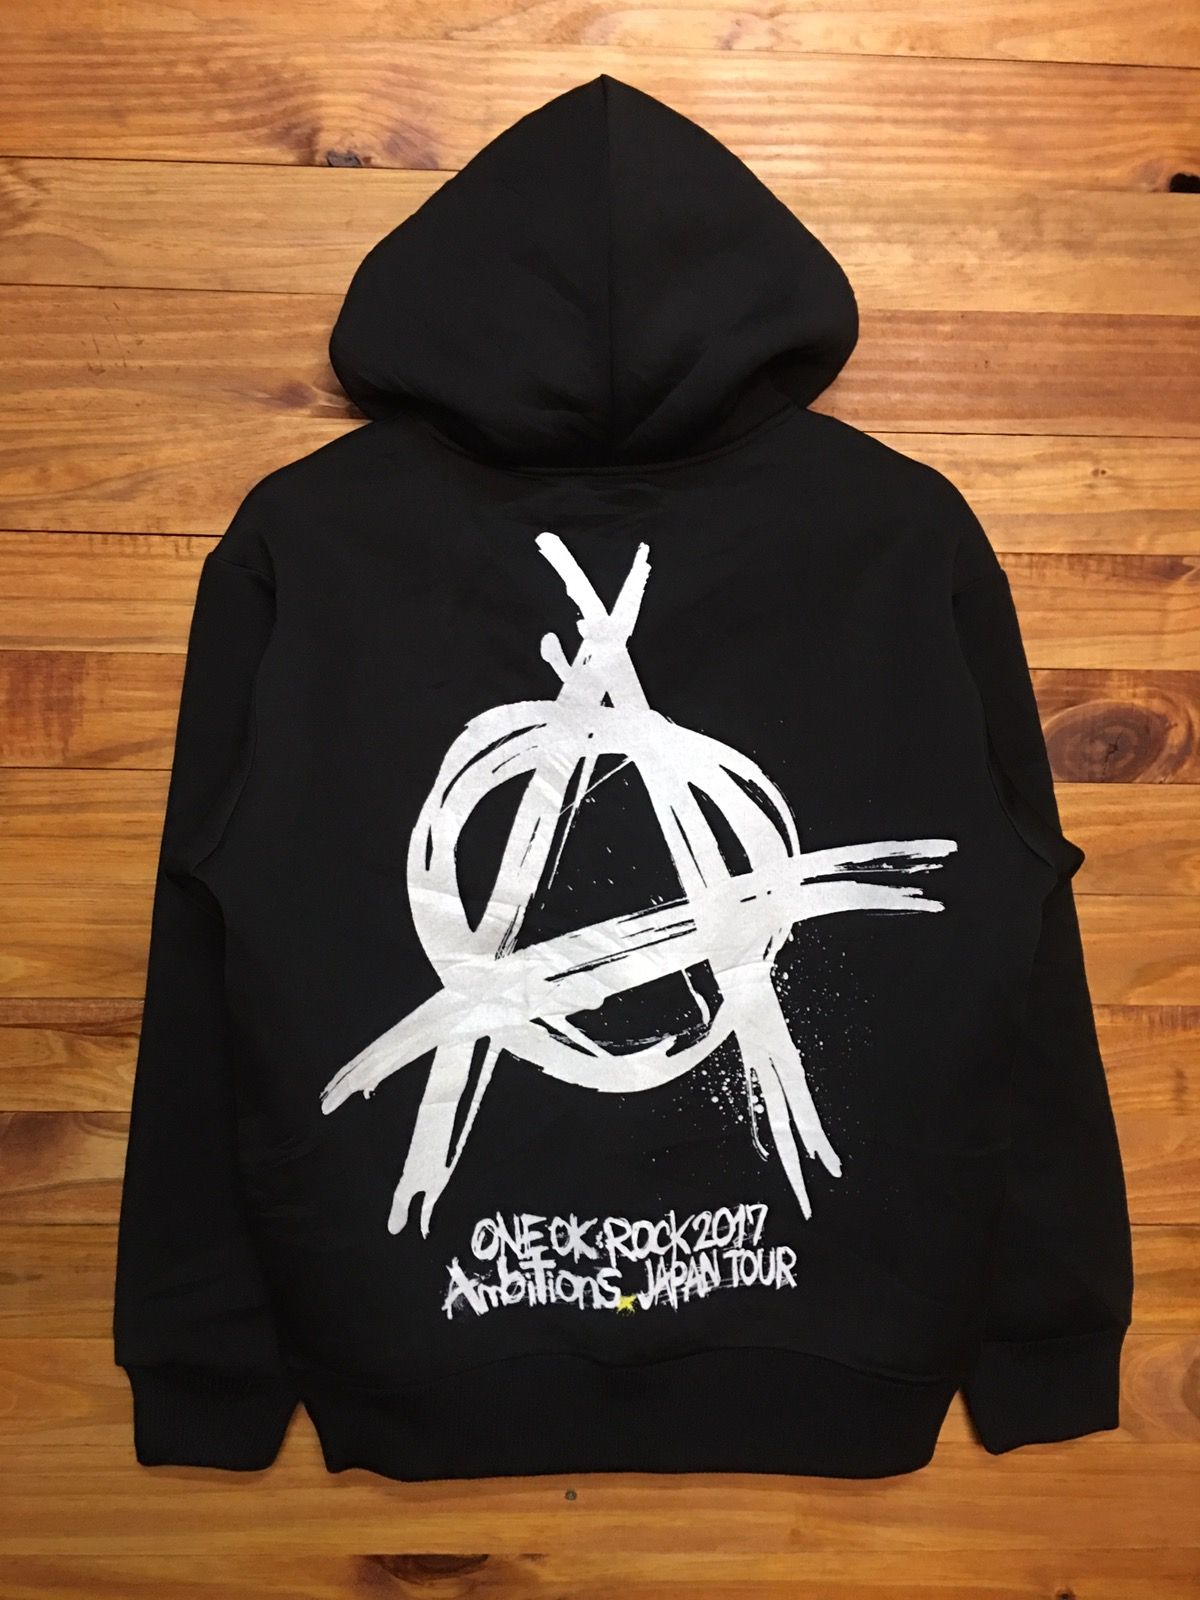 Japanese Brand ONE OK ROCK  AMBITIONS JAPAN TOUR HOODIE   Grailed